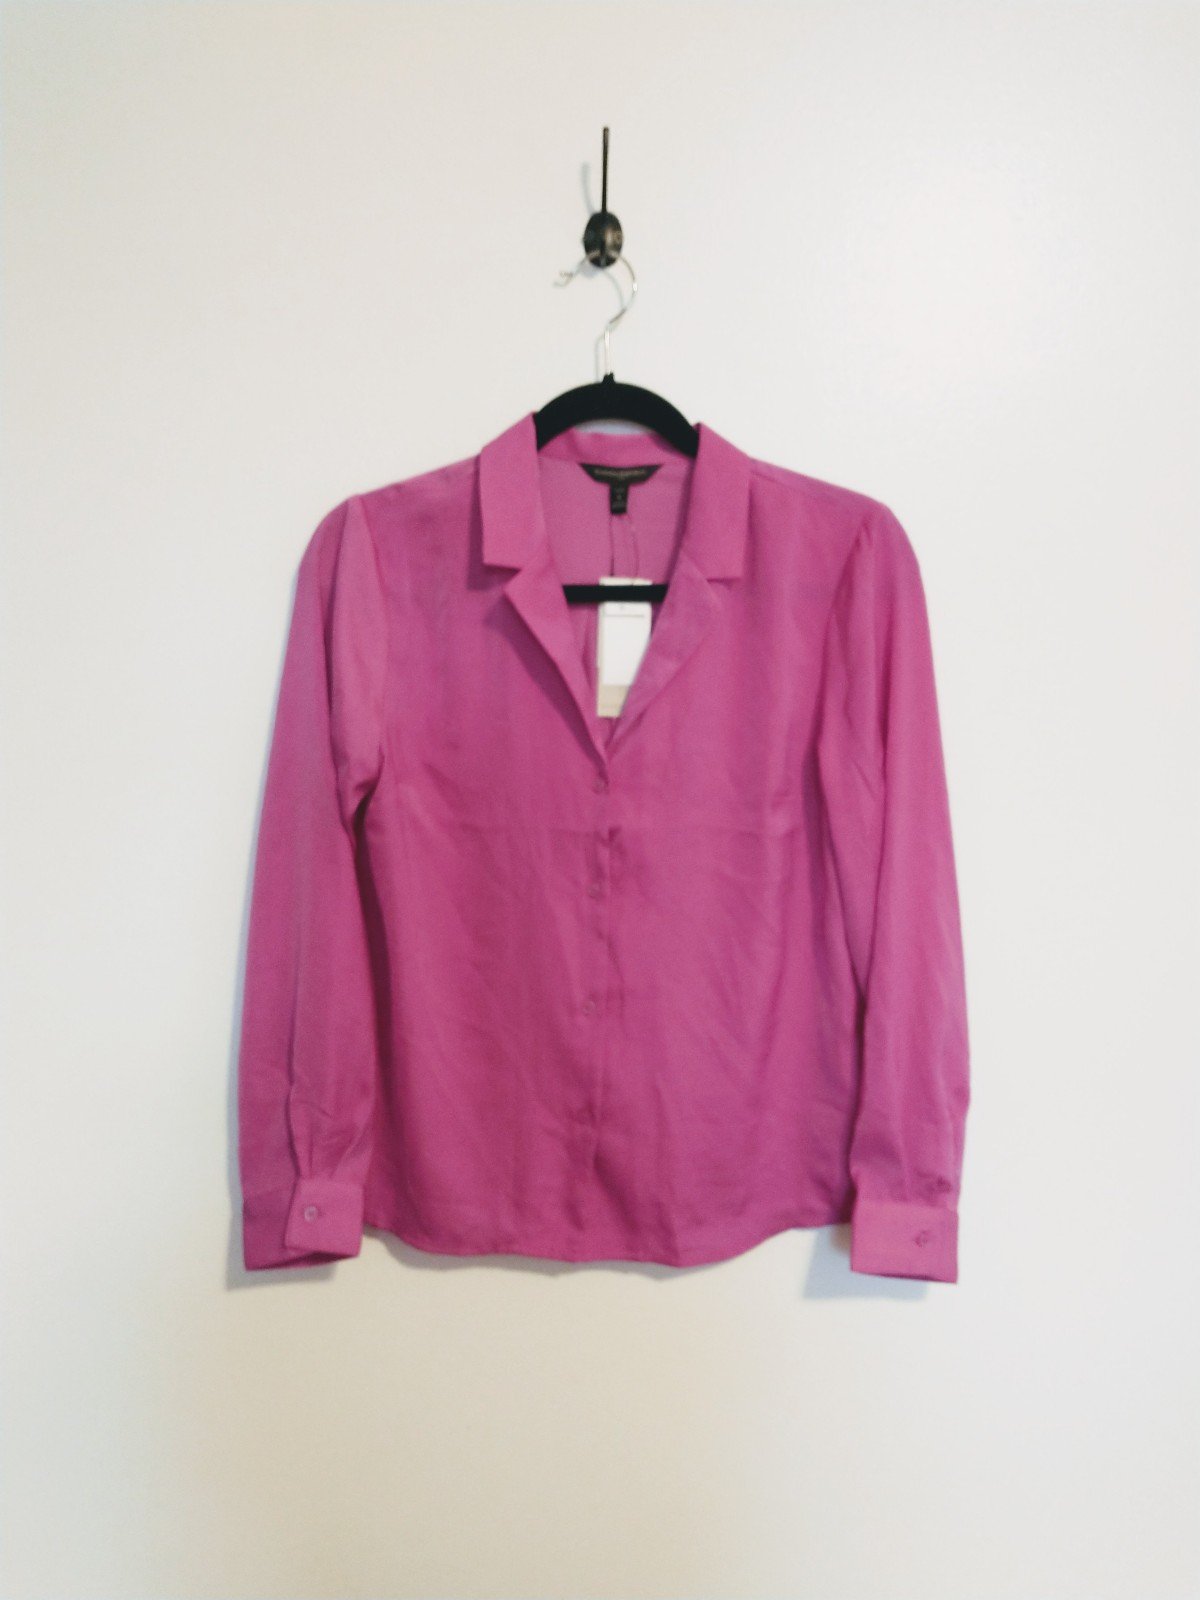 High quality NWT Banana Republic pink button up blouse size petite small, $65 HqoKVWlCE Wholesale